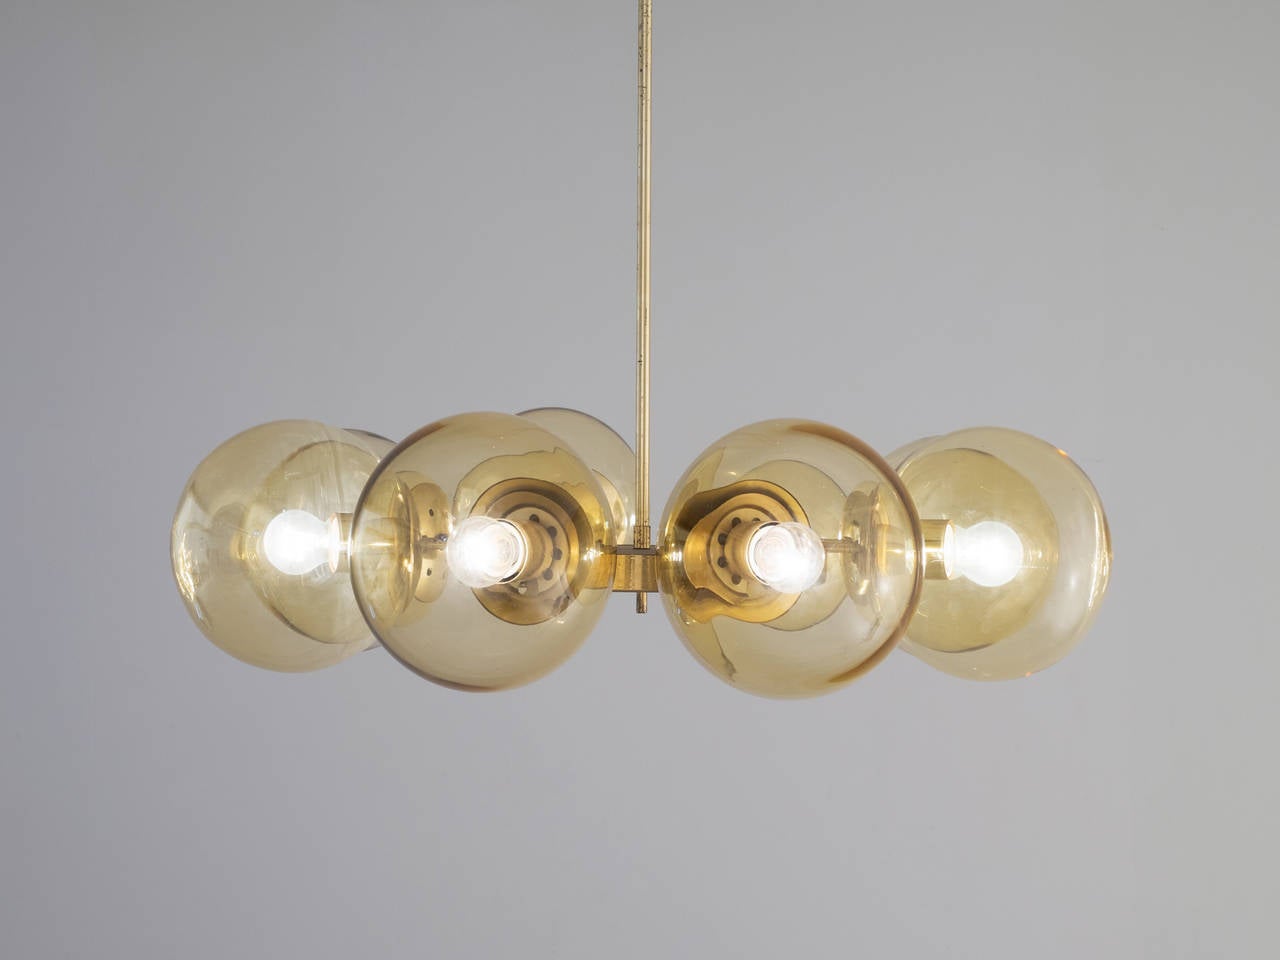 Large chandelier, yellow glass and brass, Europe, 1950s. 

The brass is nicely patinated and reflexes the light which creates a nice soft diffuse lighting, due to the gold yellow tinted bulbs. The piece vibrates a warm ambient light for the